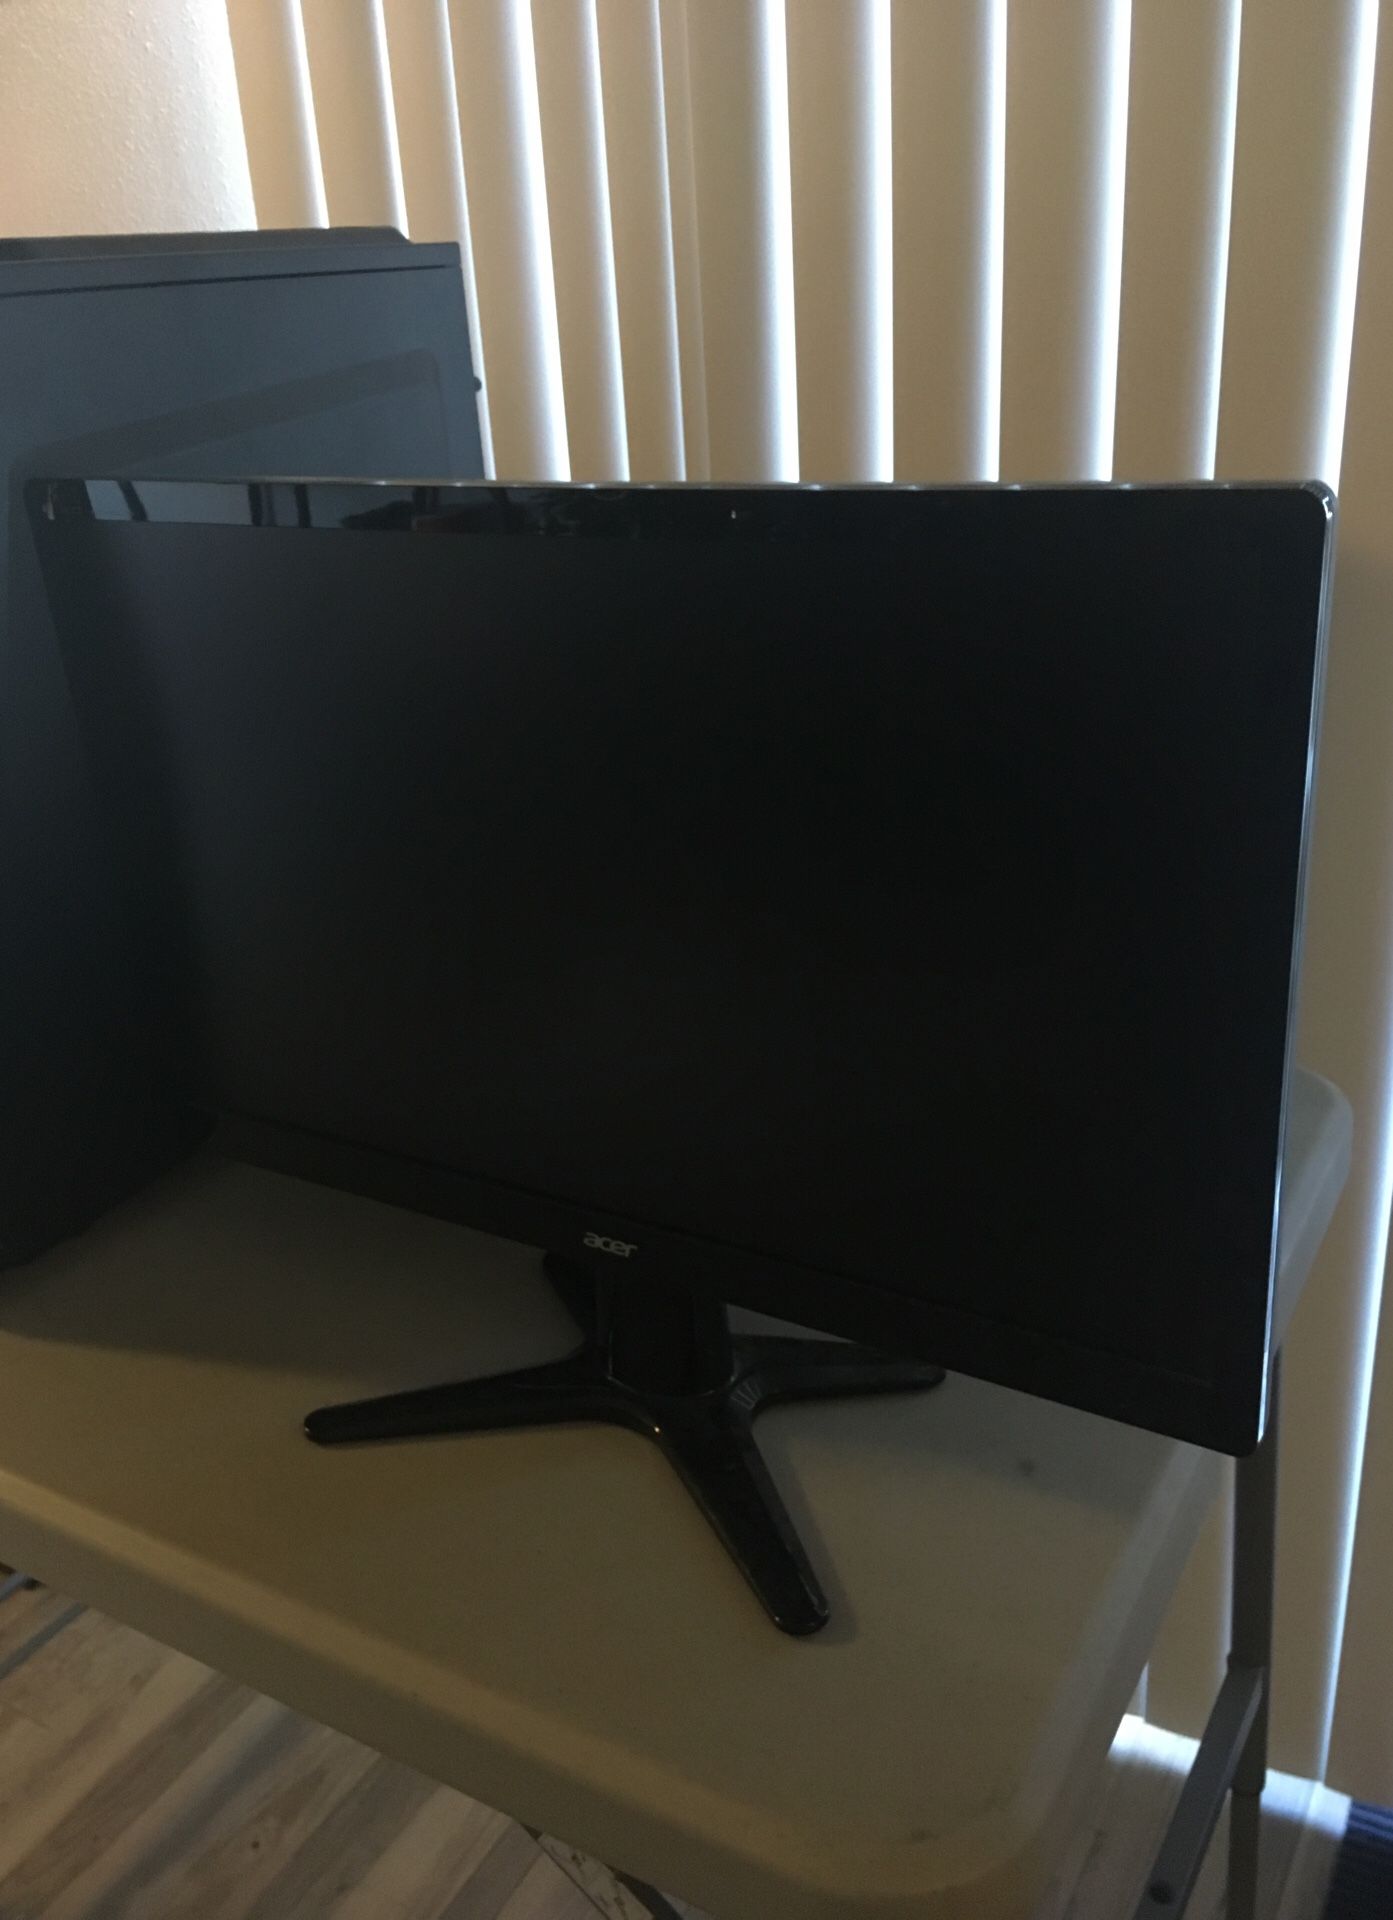 Acer 21.5” Computer Monitor